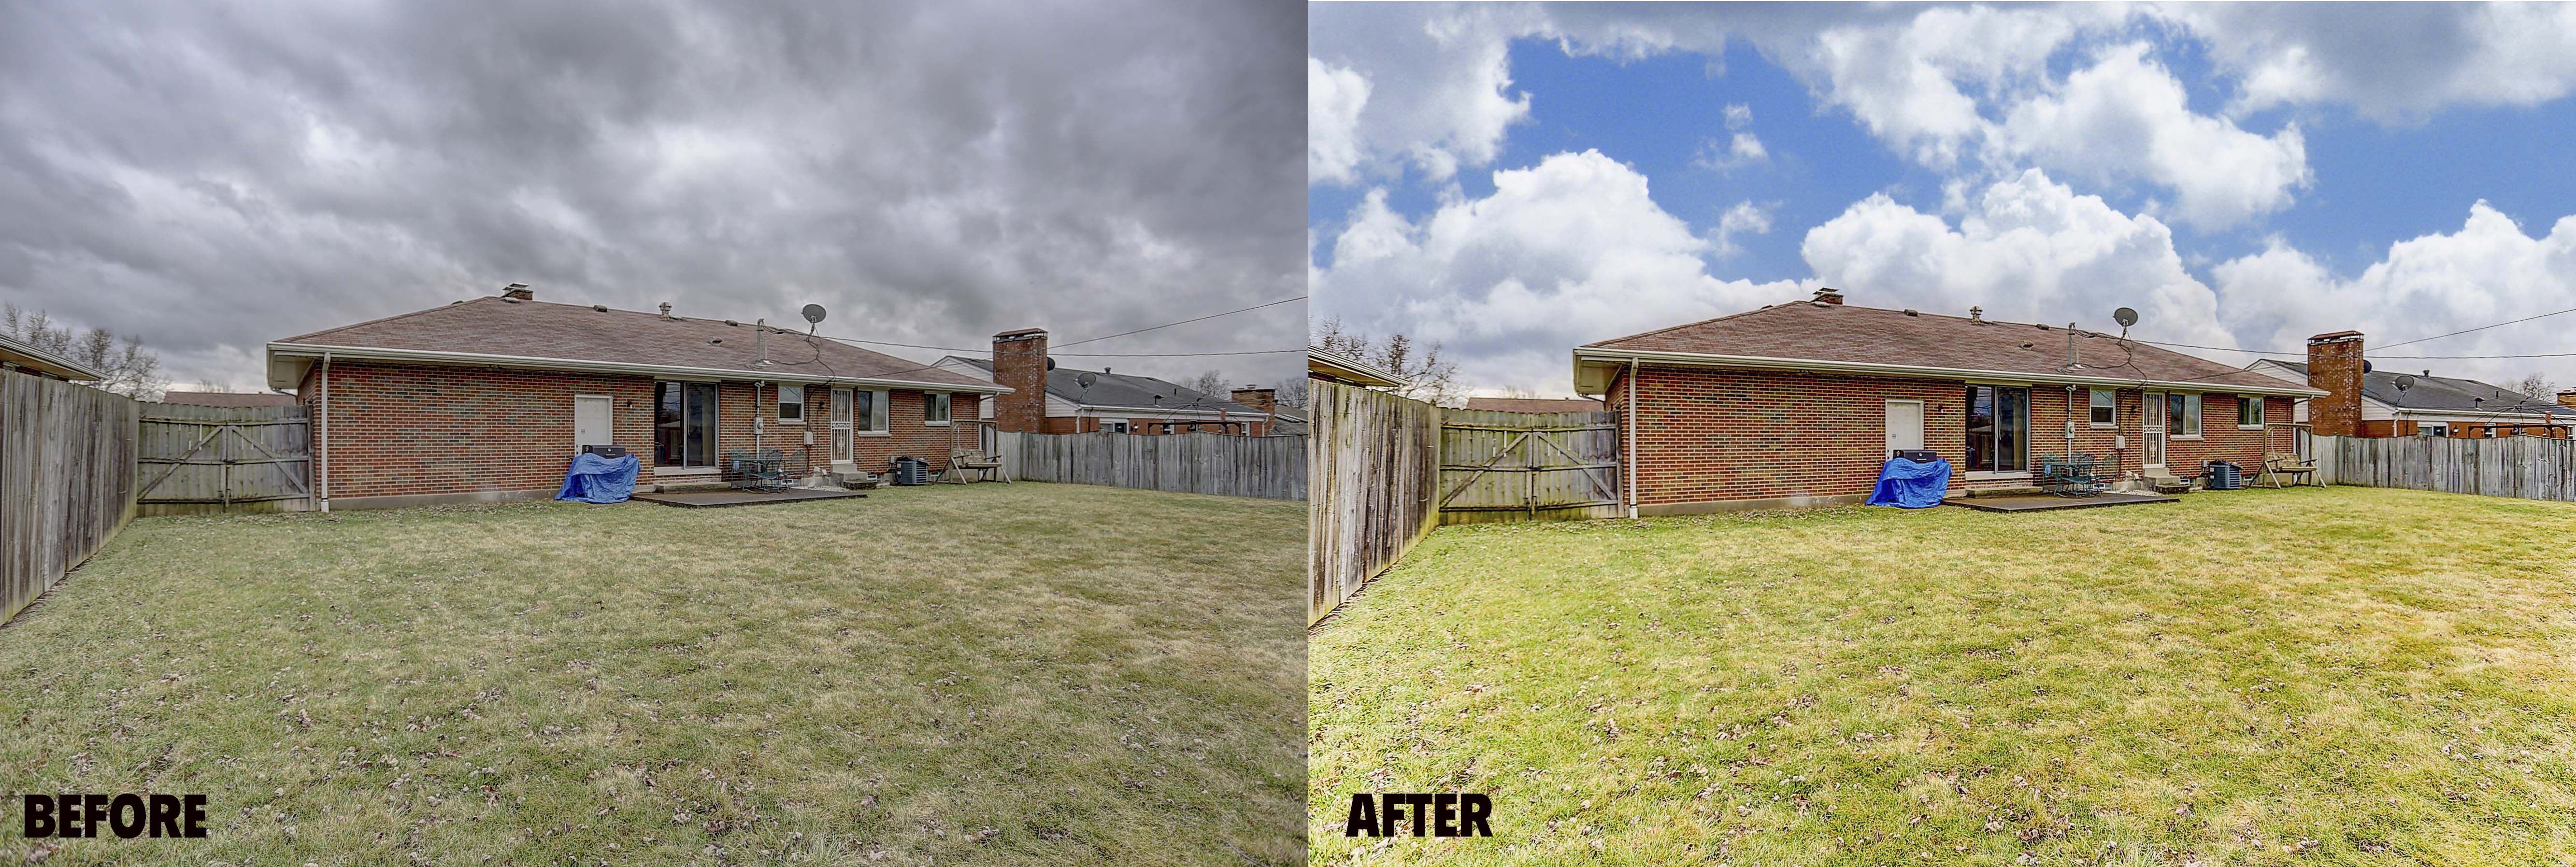 #Sample10: Property Photo Editing and Retouching | Us real estate ...